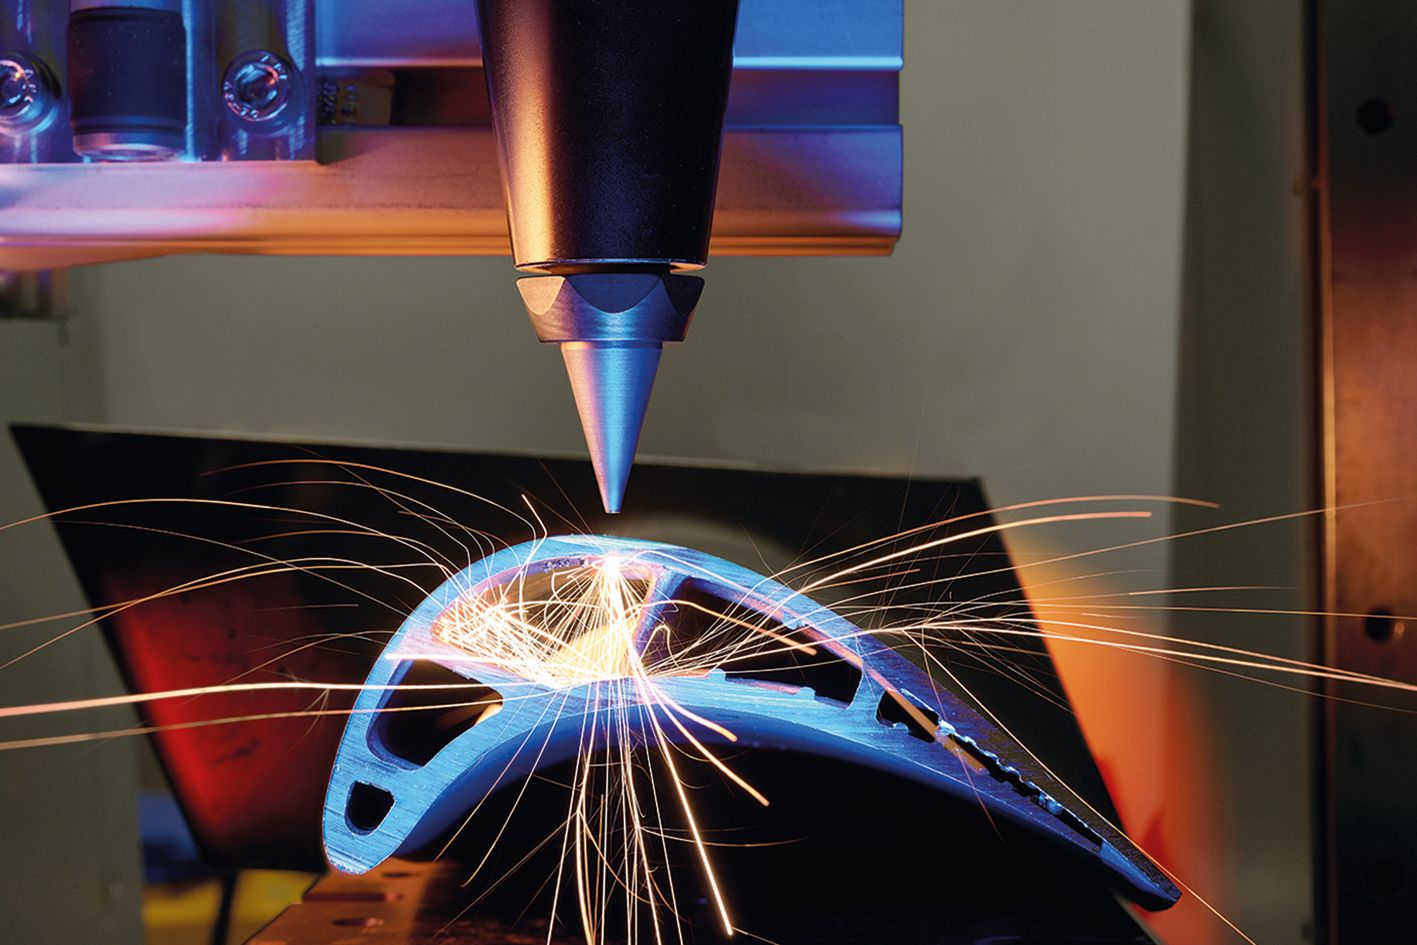 The "Laser-based Manufacturing" technology platform shows SMEs, for example, how the use of laser drilling can optimize their production processes.